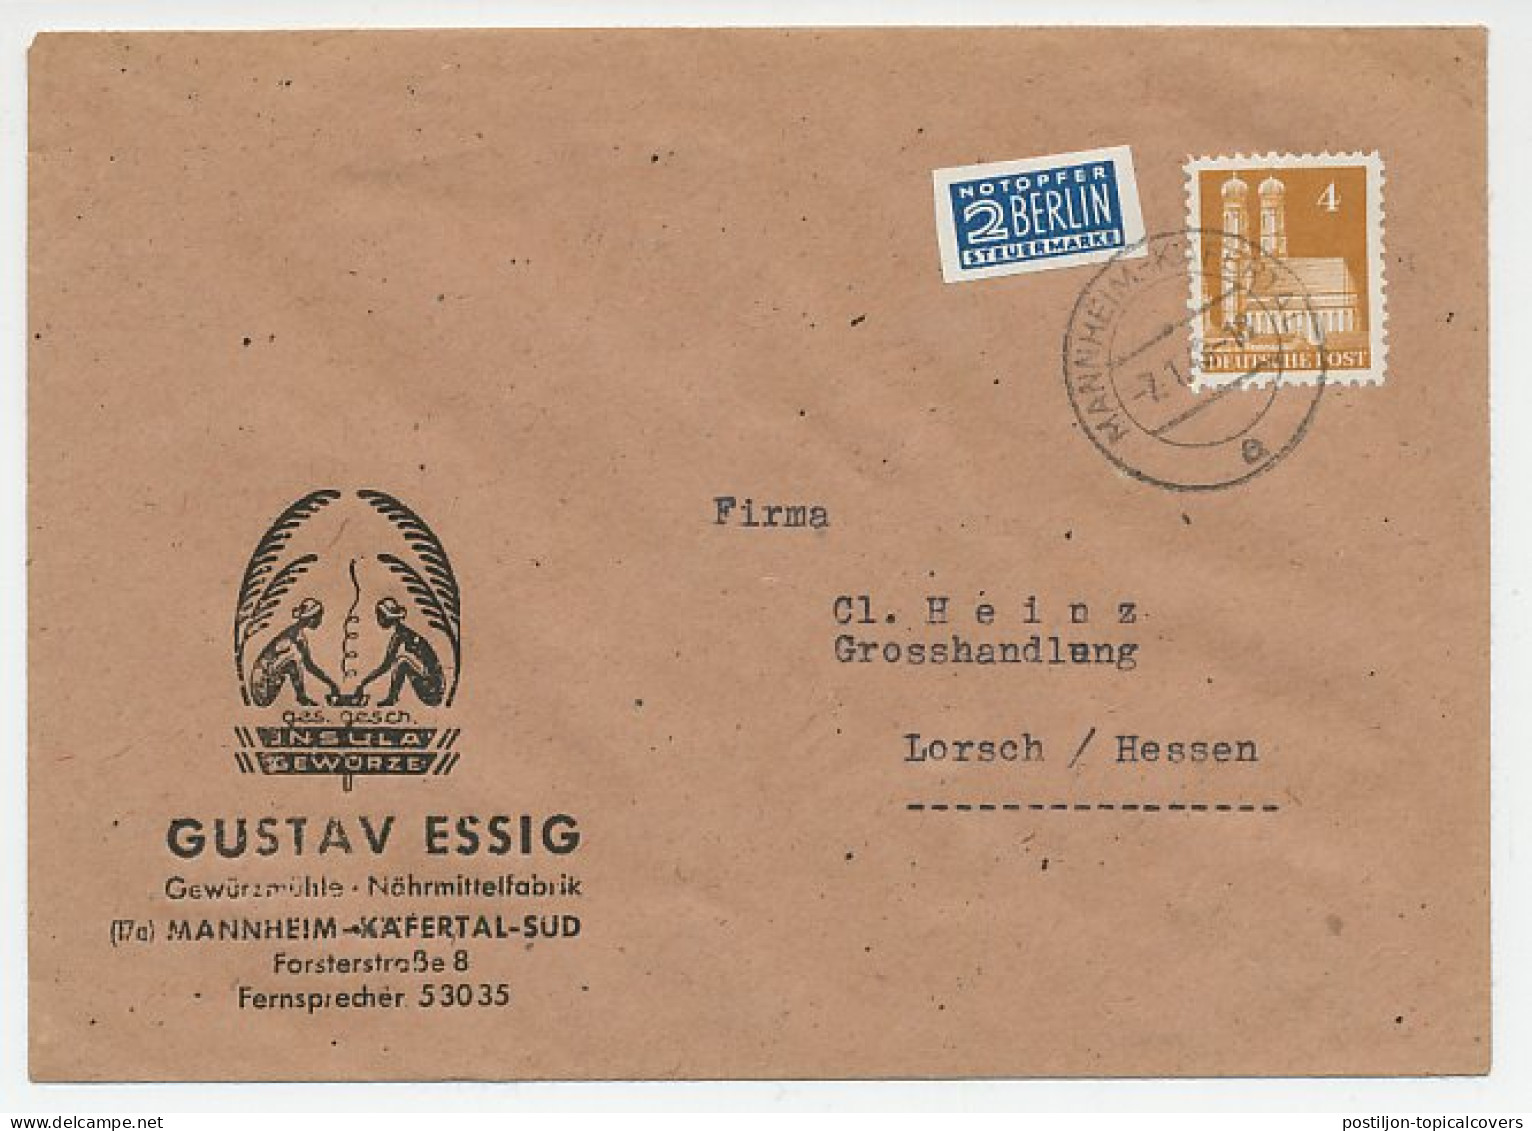 Illustrated Cover Deutsche Post / Germany 1949 Insula - Island - Spices - Indios Americanas